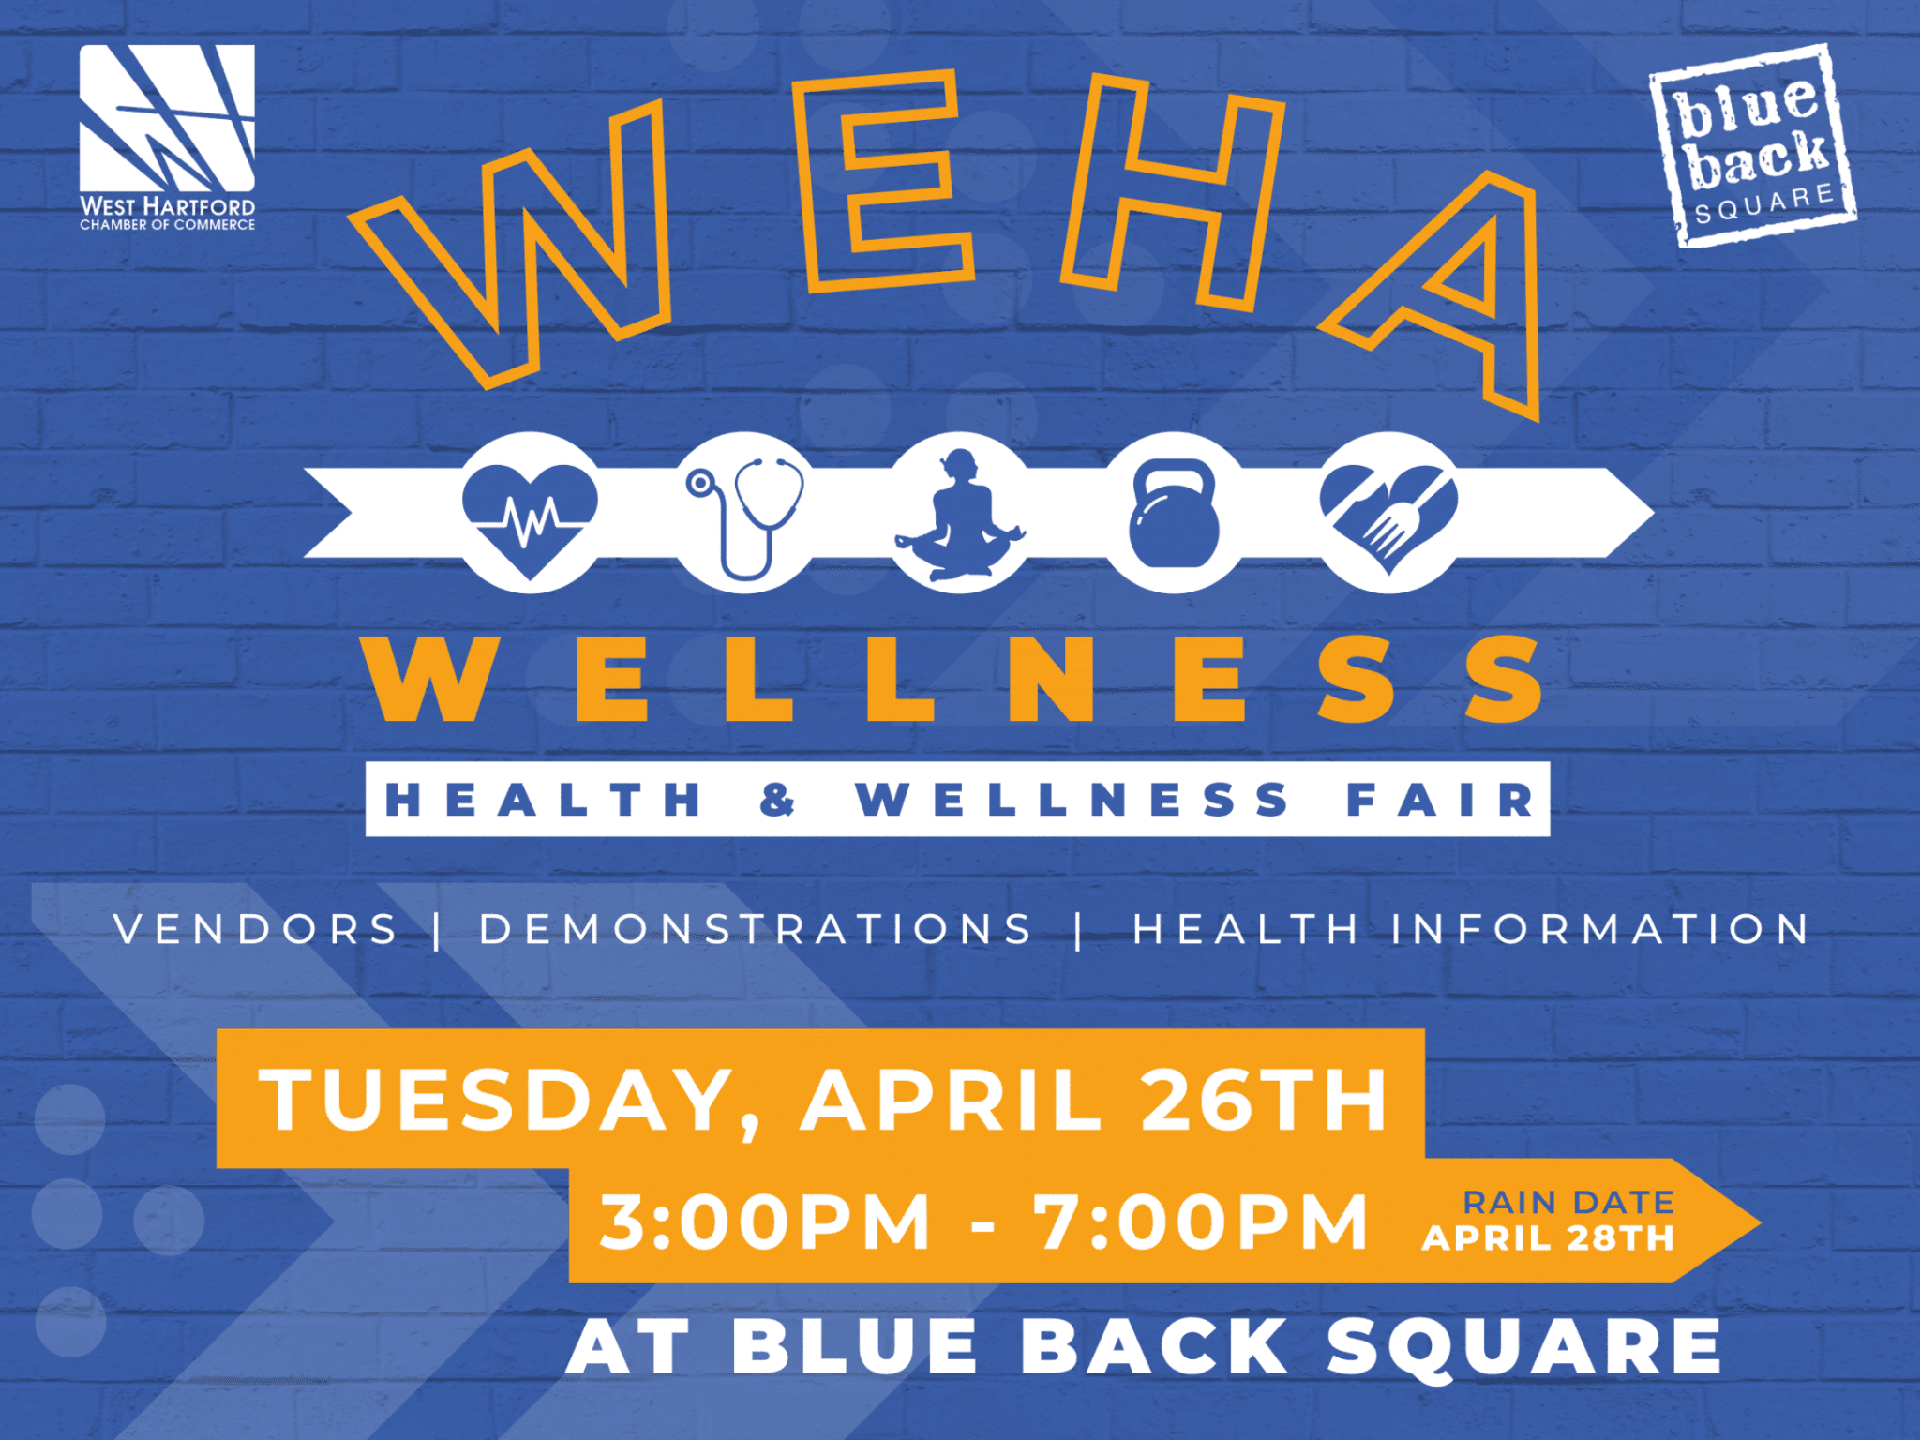 WeHa Wellness Event Will Include Exhibits and Activities for the